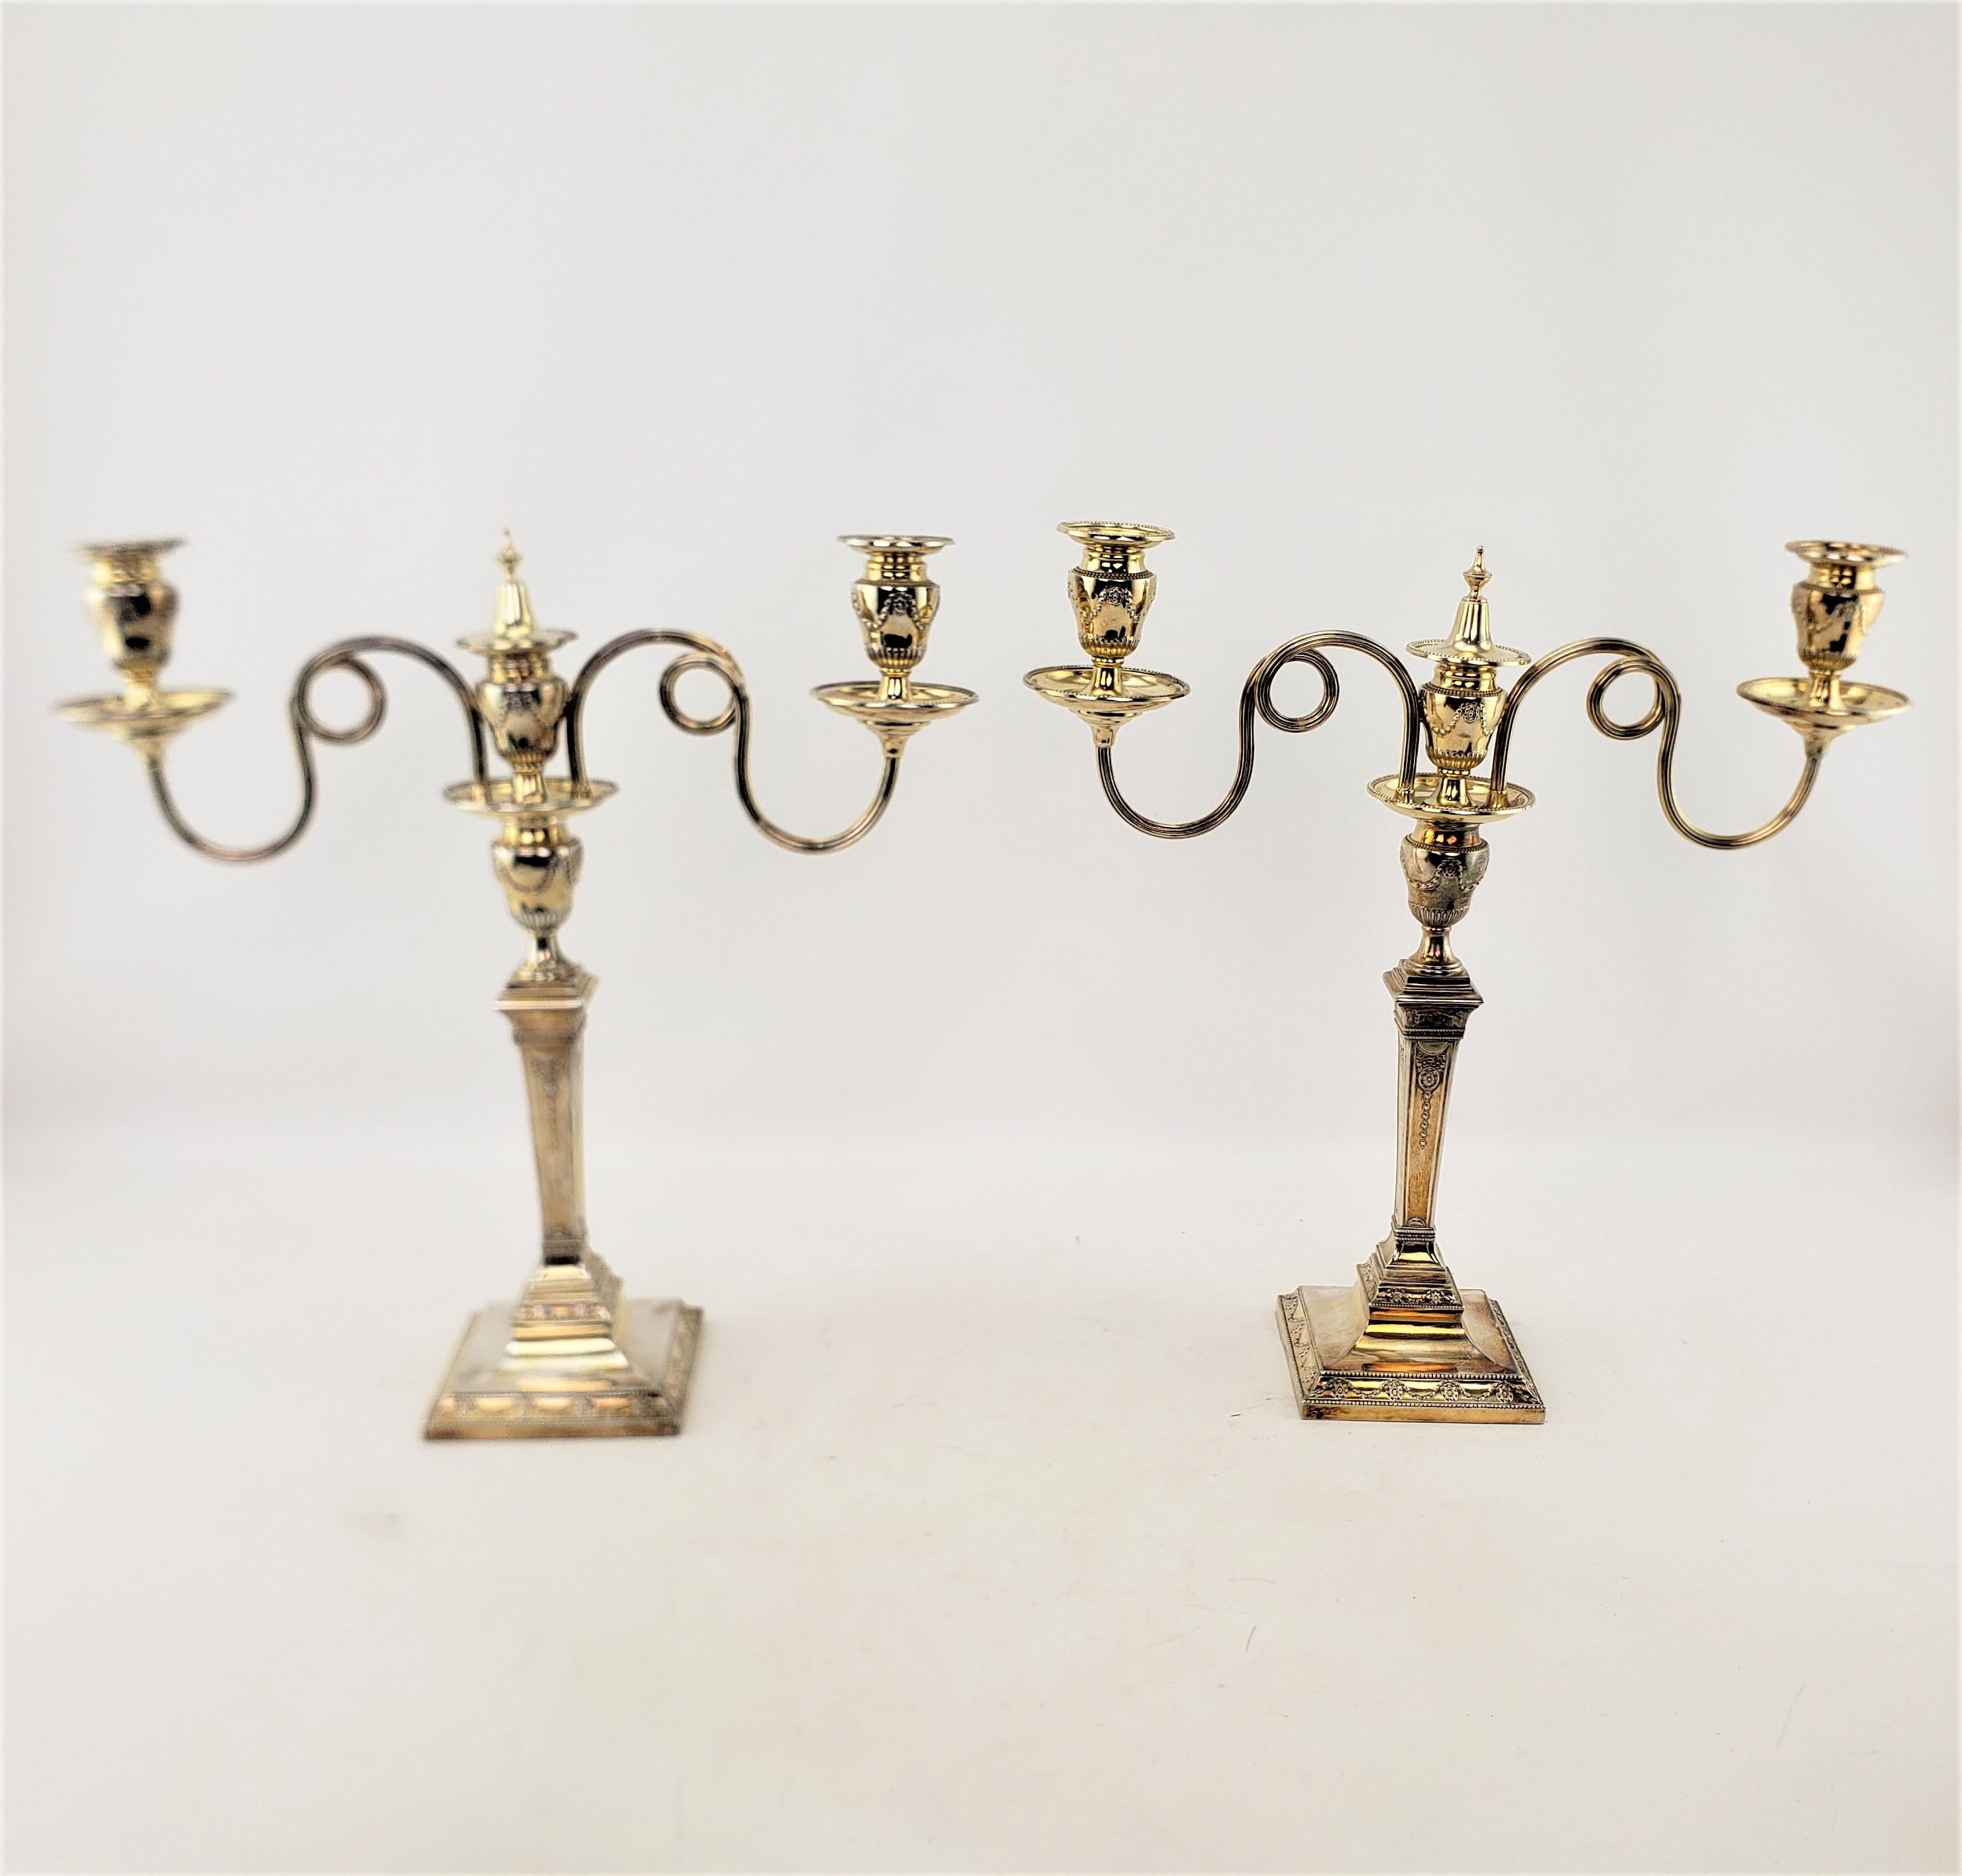 Edwardian Set of Antique Mappin & Webb Silver Plated & Gilt Washed Convertible Candelabras For Sale